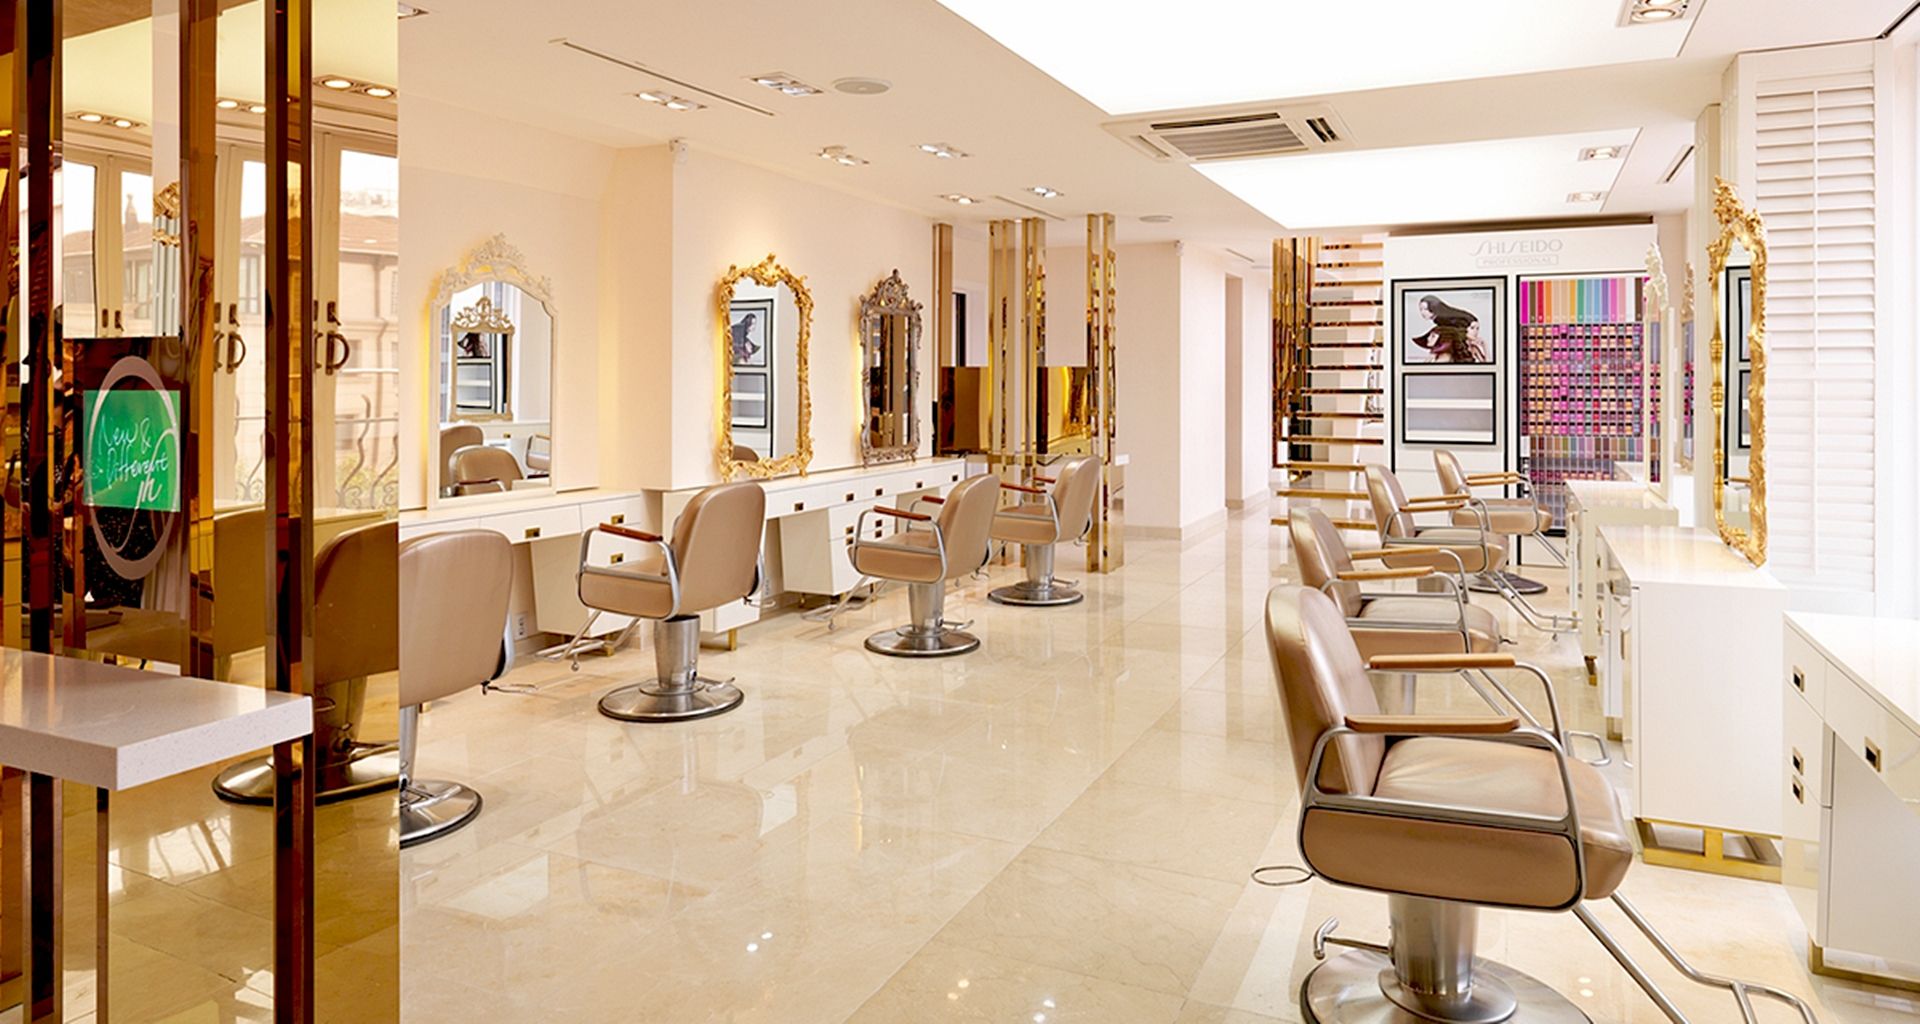 9. "The Top Hair Salons for Sky Silver Blue Hair Color" - wide 6